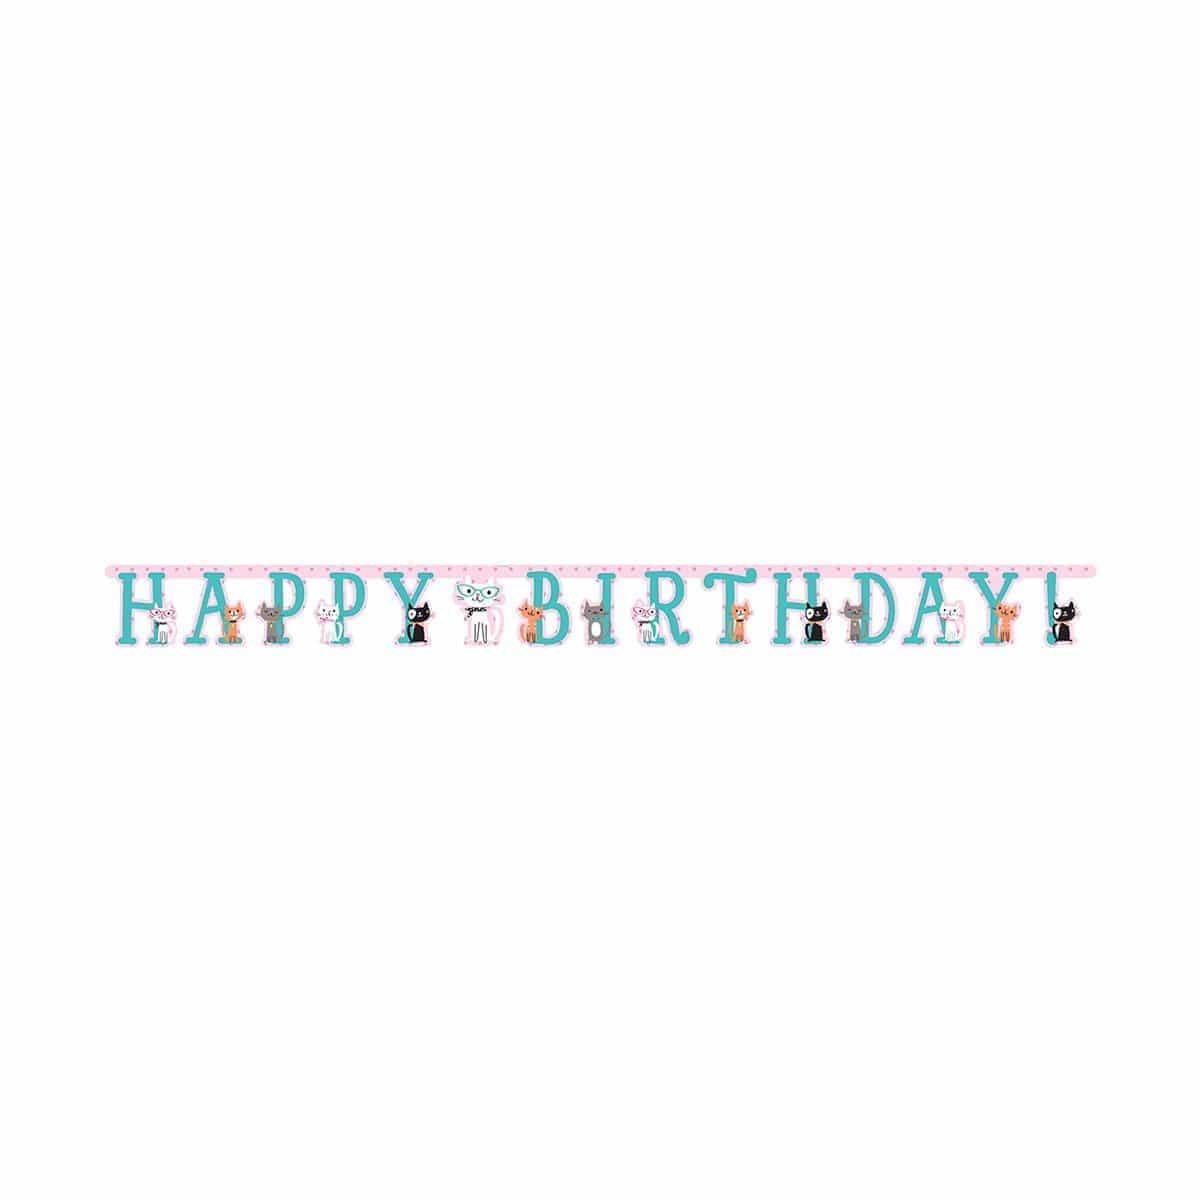 Buy Kids Birthday Purr-fect Party Happy Birthday banner sold at Party Expert